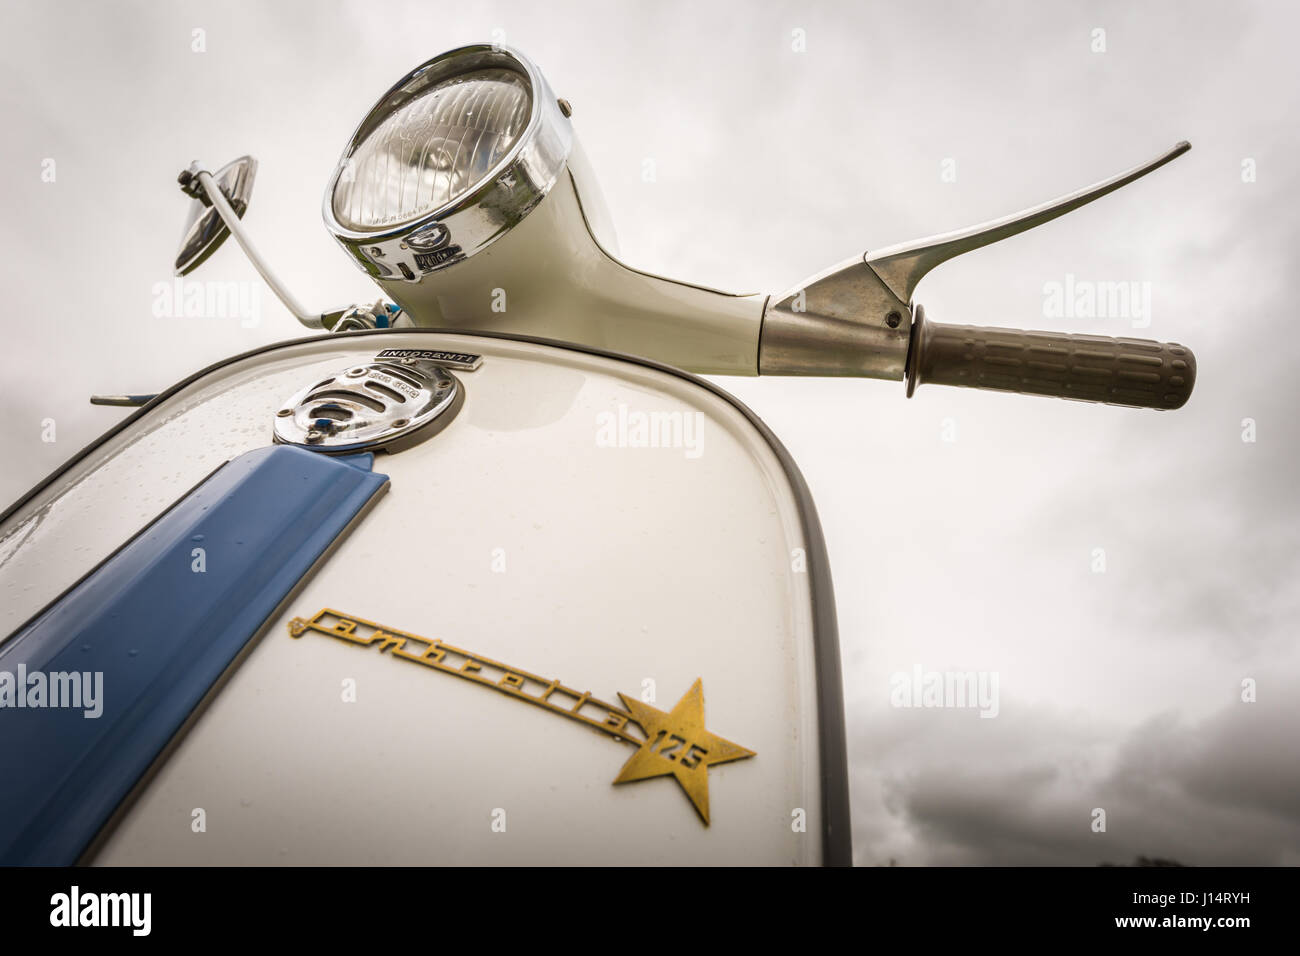 View of the handle bars of a classic Lambretta motor scooter bike Stock Photo